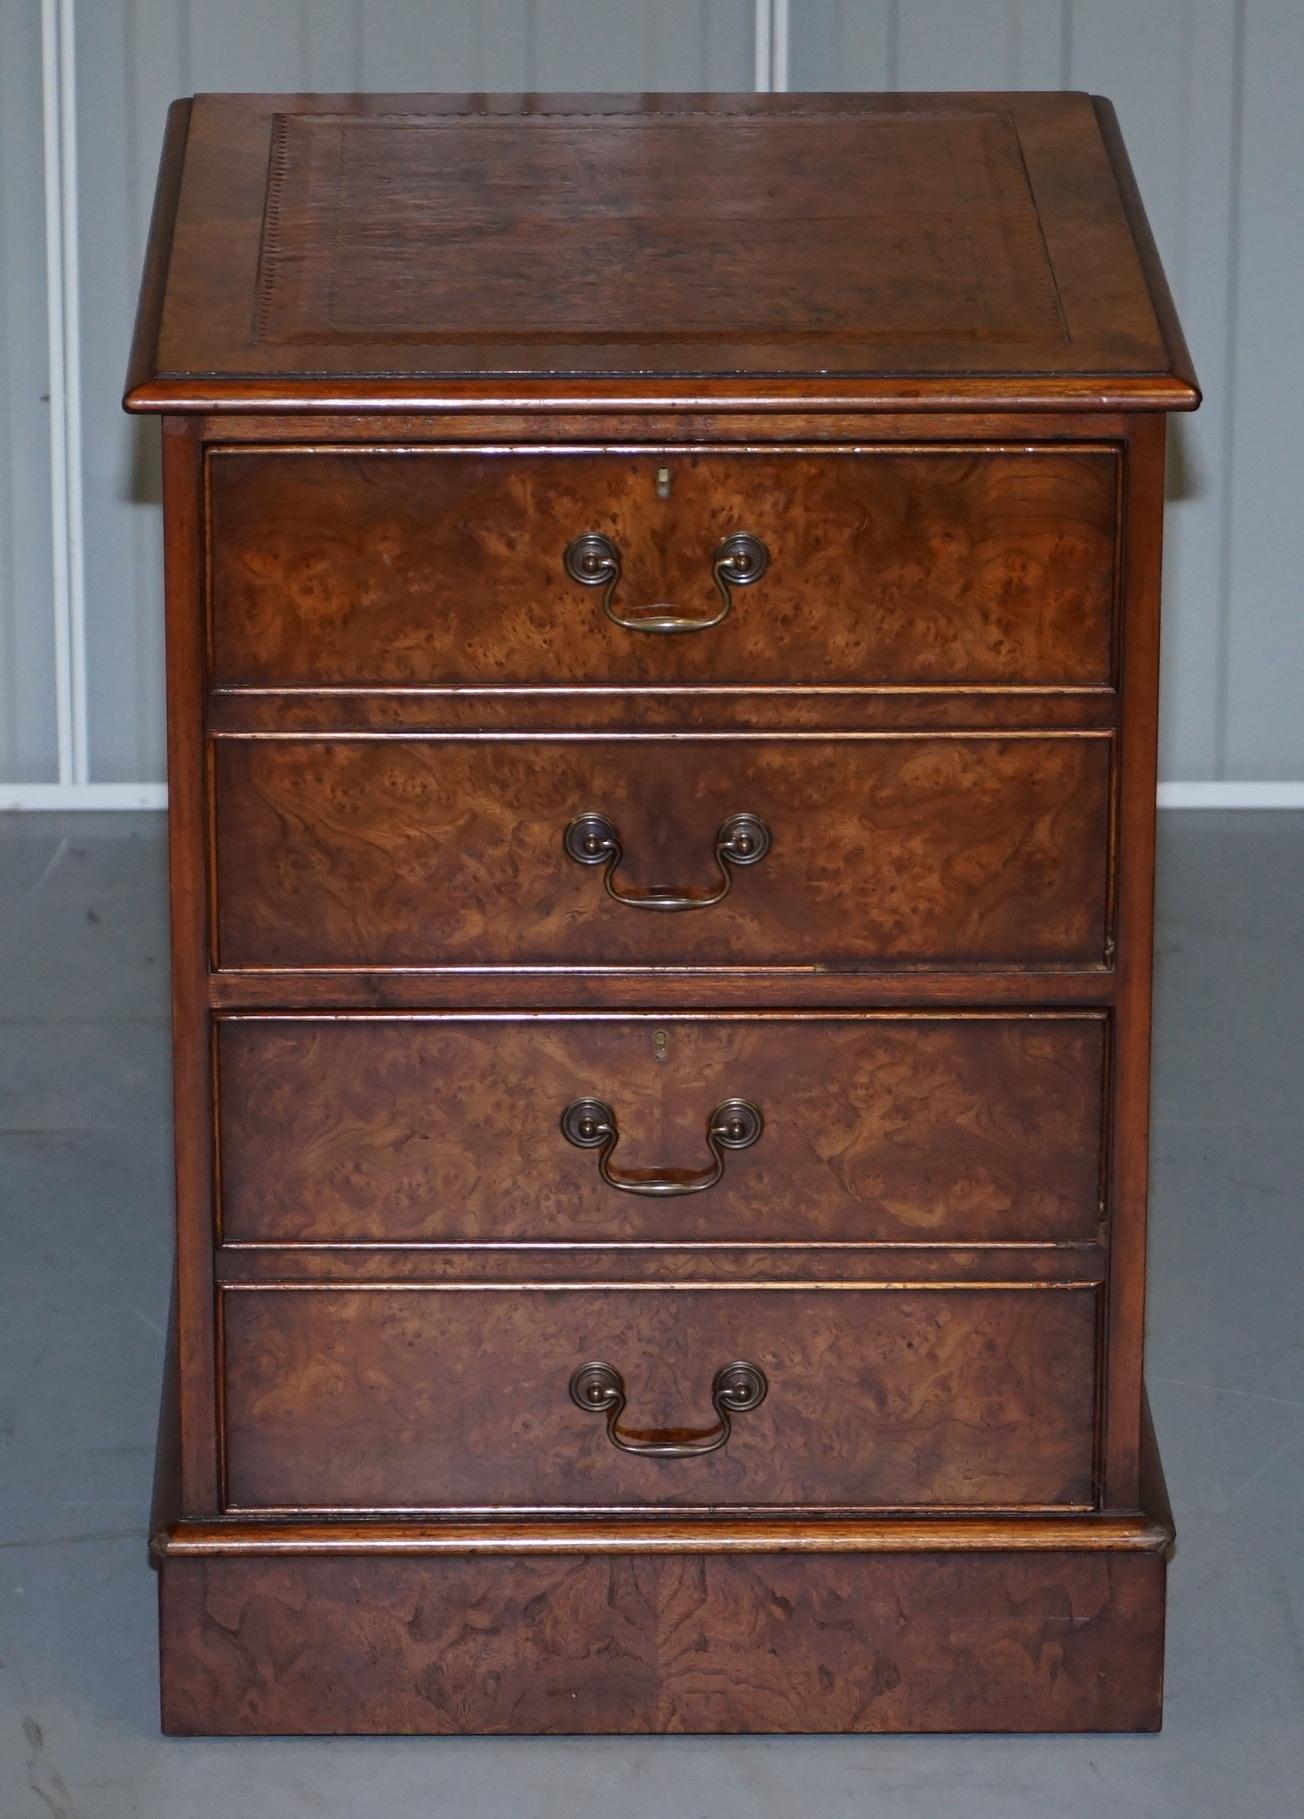 We are delighted to this lovely burr elm brown leather topped filing cabinet

In terms of condition we have deep cleaned hand condition waxed and hand polished it from top to bottom, there will be normal patina marks all-over from honest use and